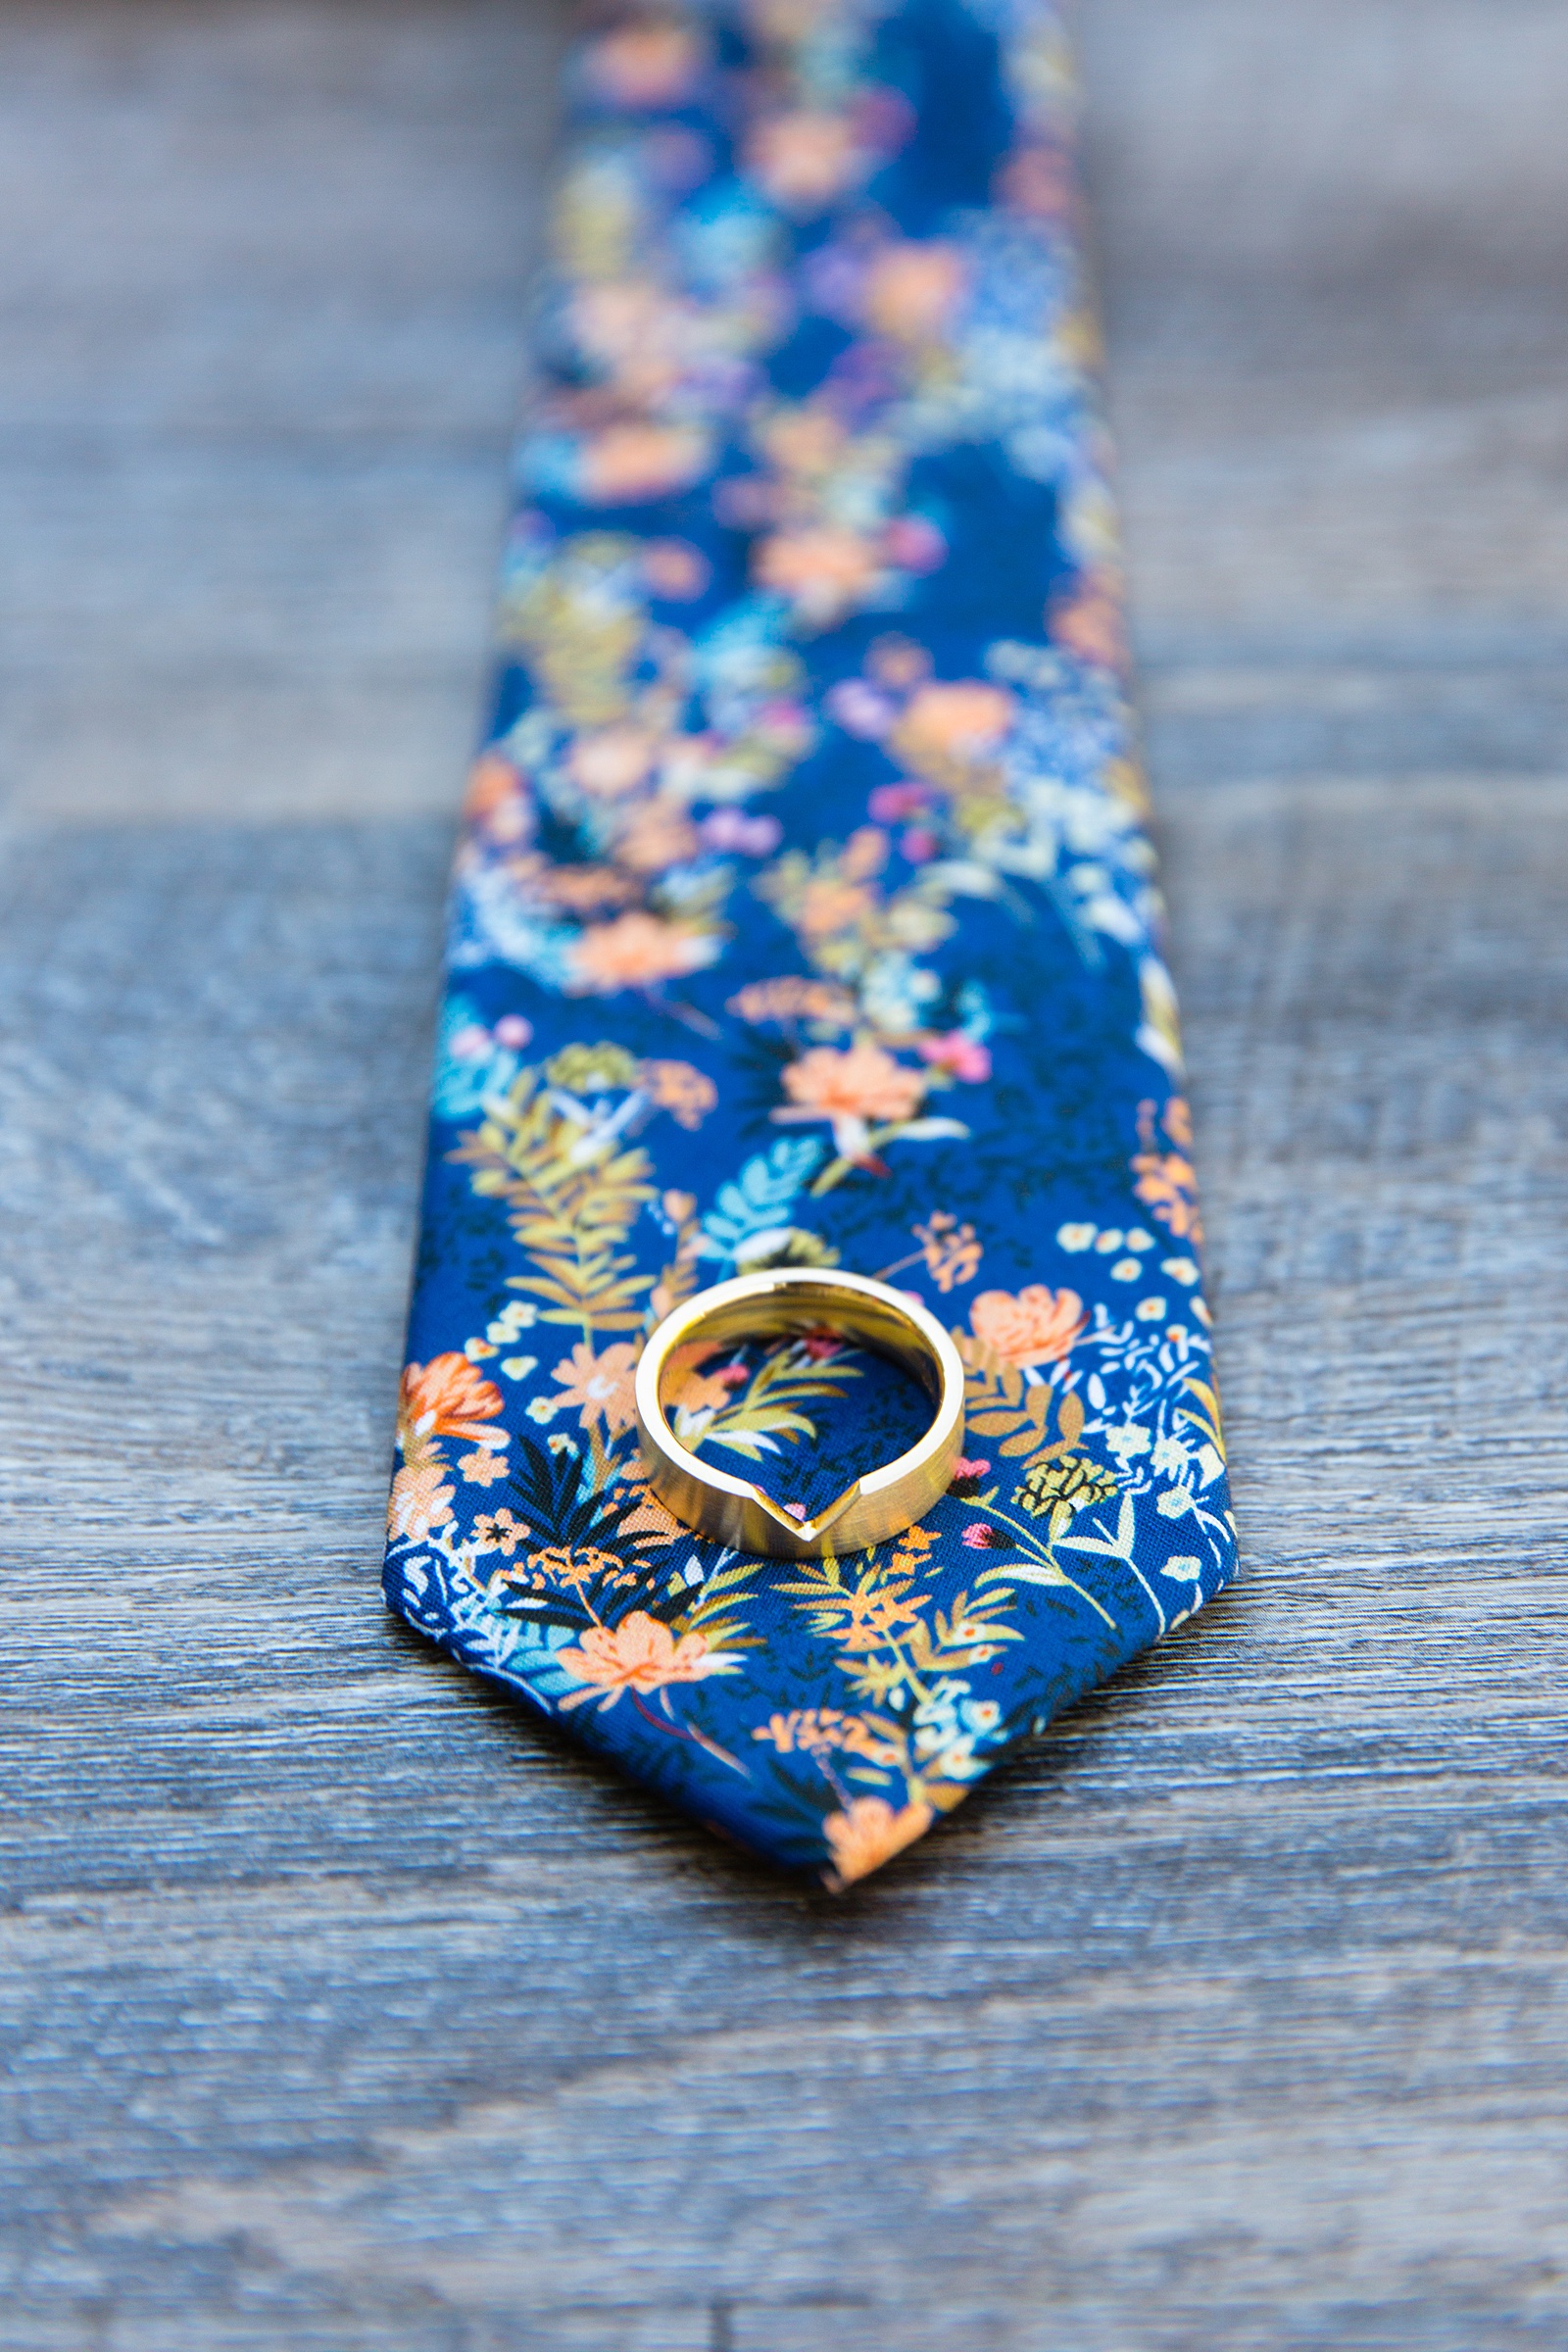 Groom's wedding day details of a floral tie and unique gold wedding ring by PMA Photography.